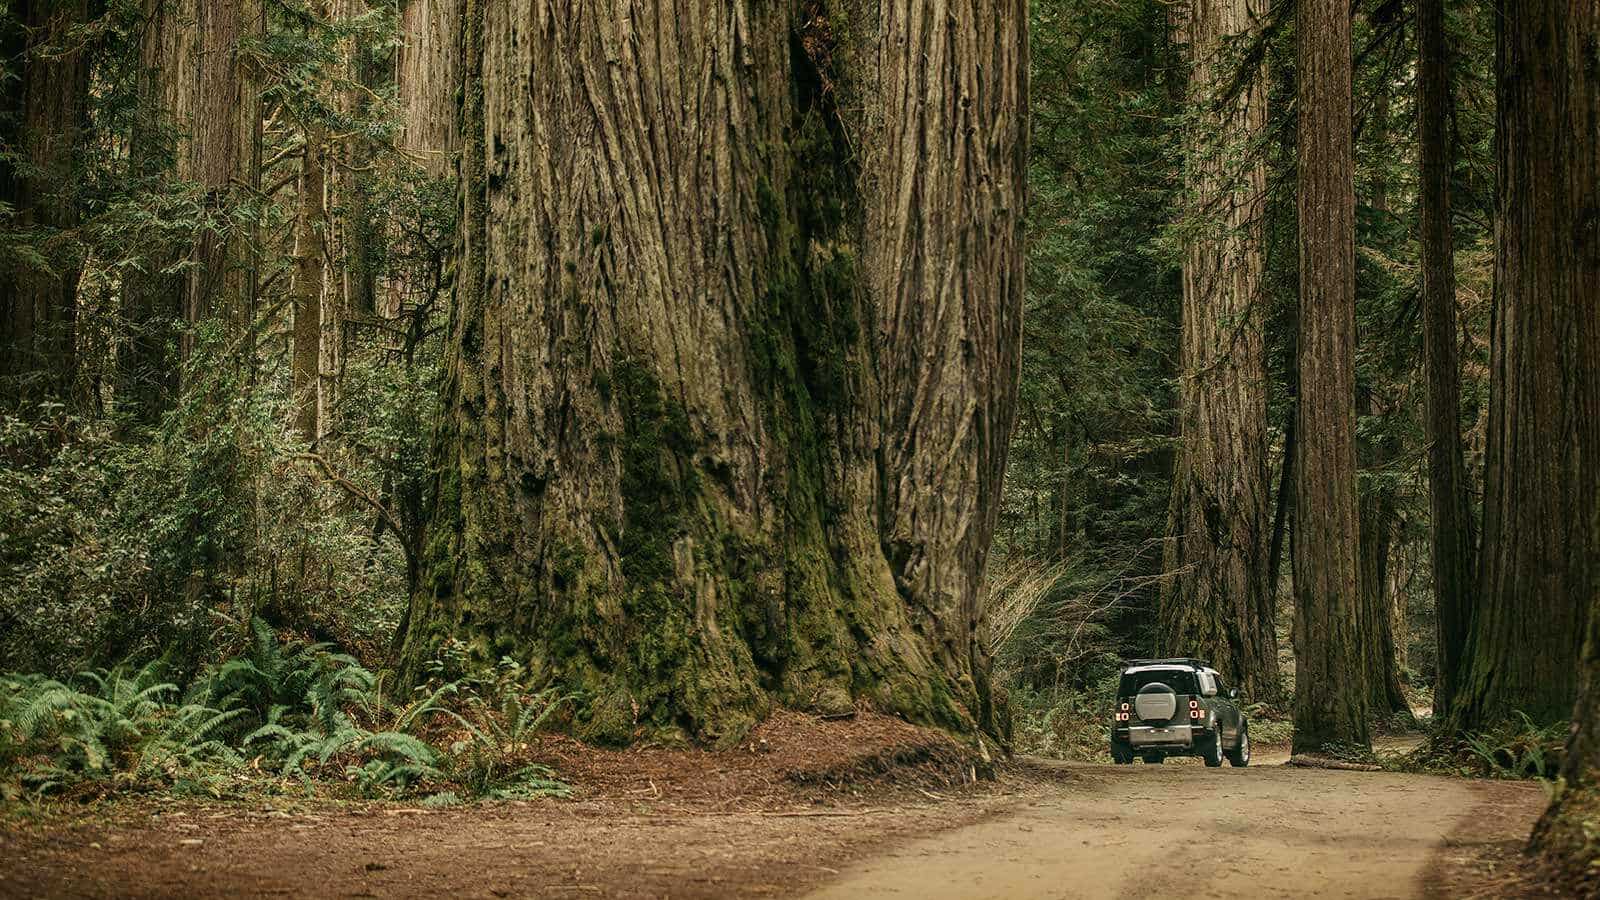 John Mayer Land Rover Defender driving in forest